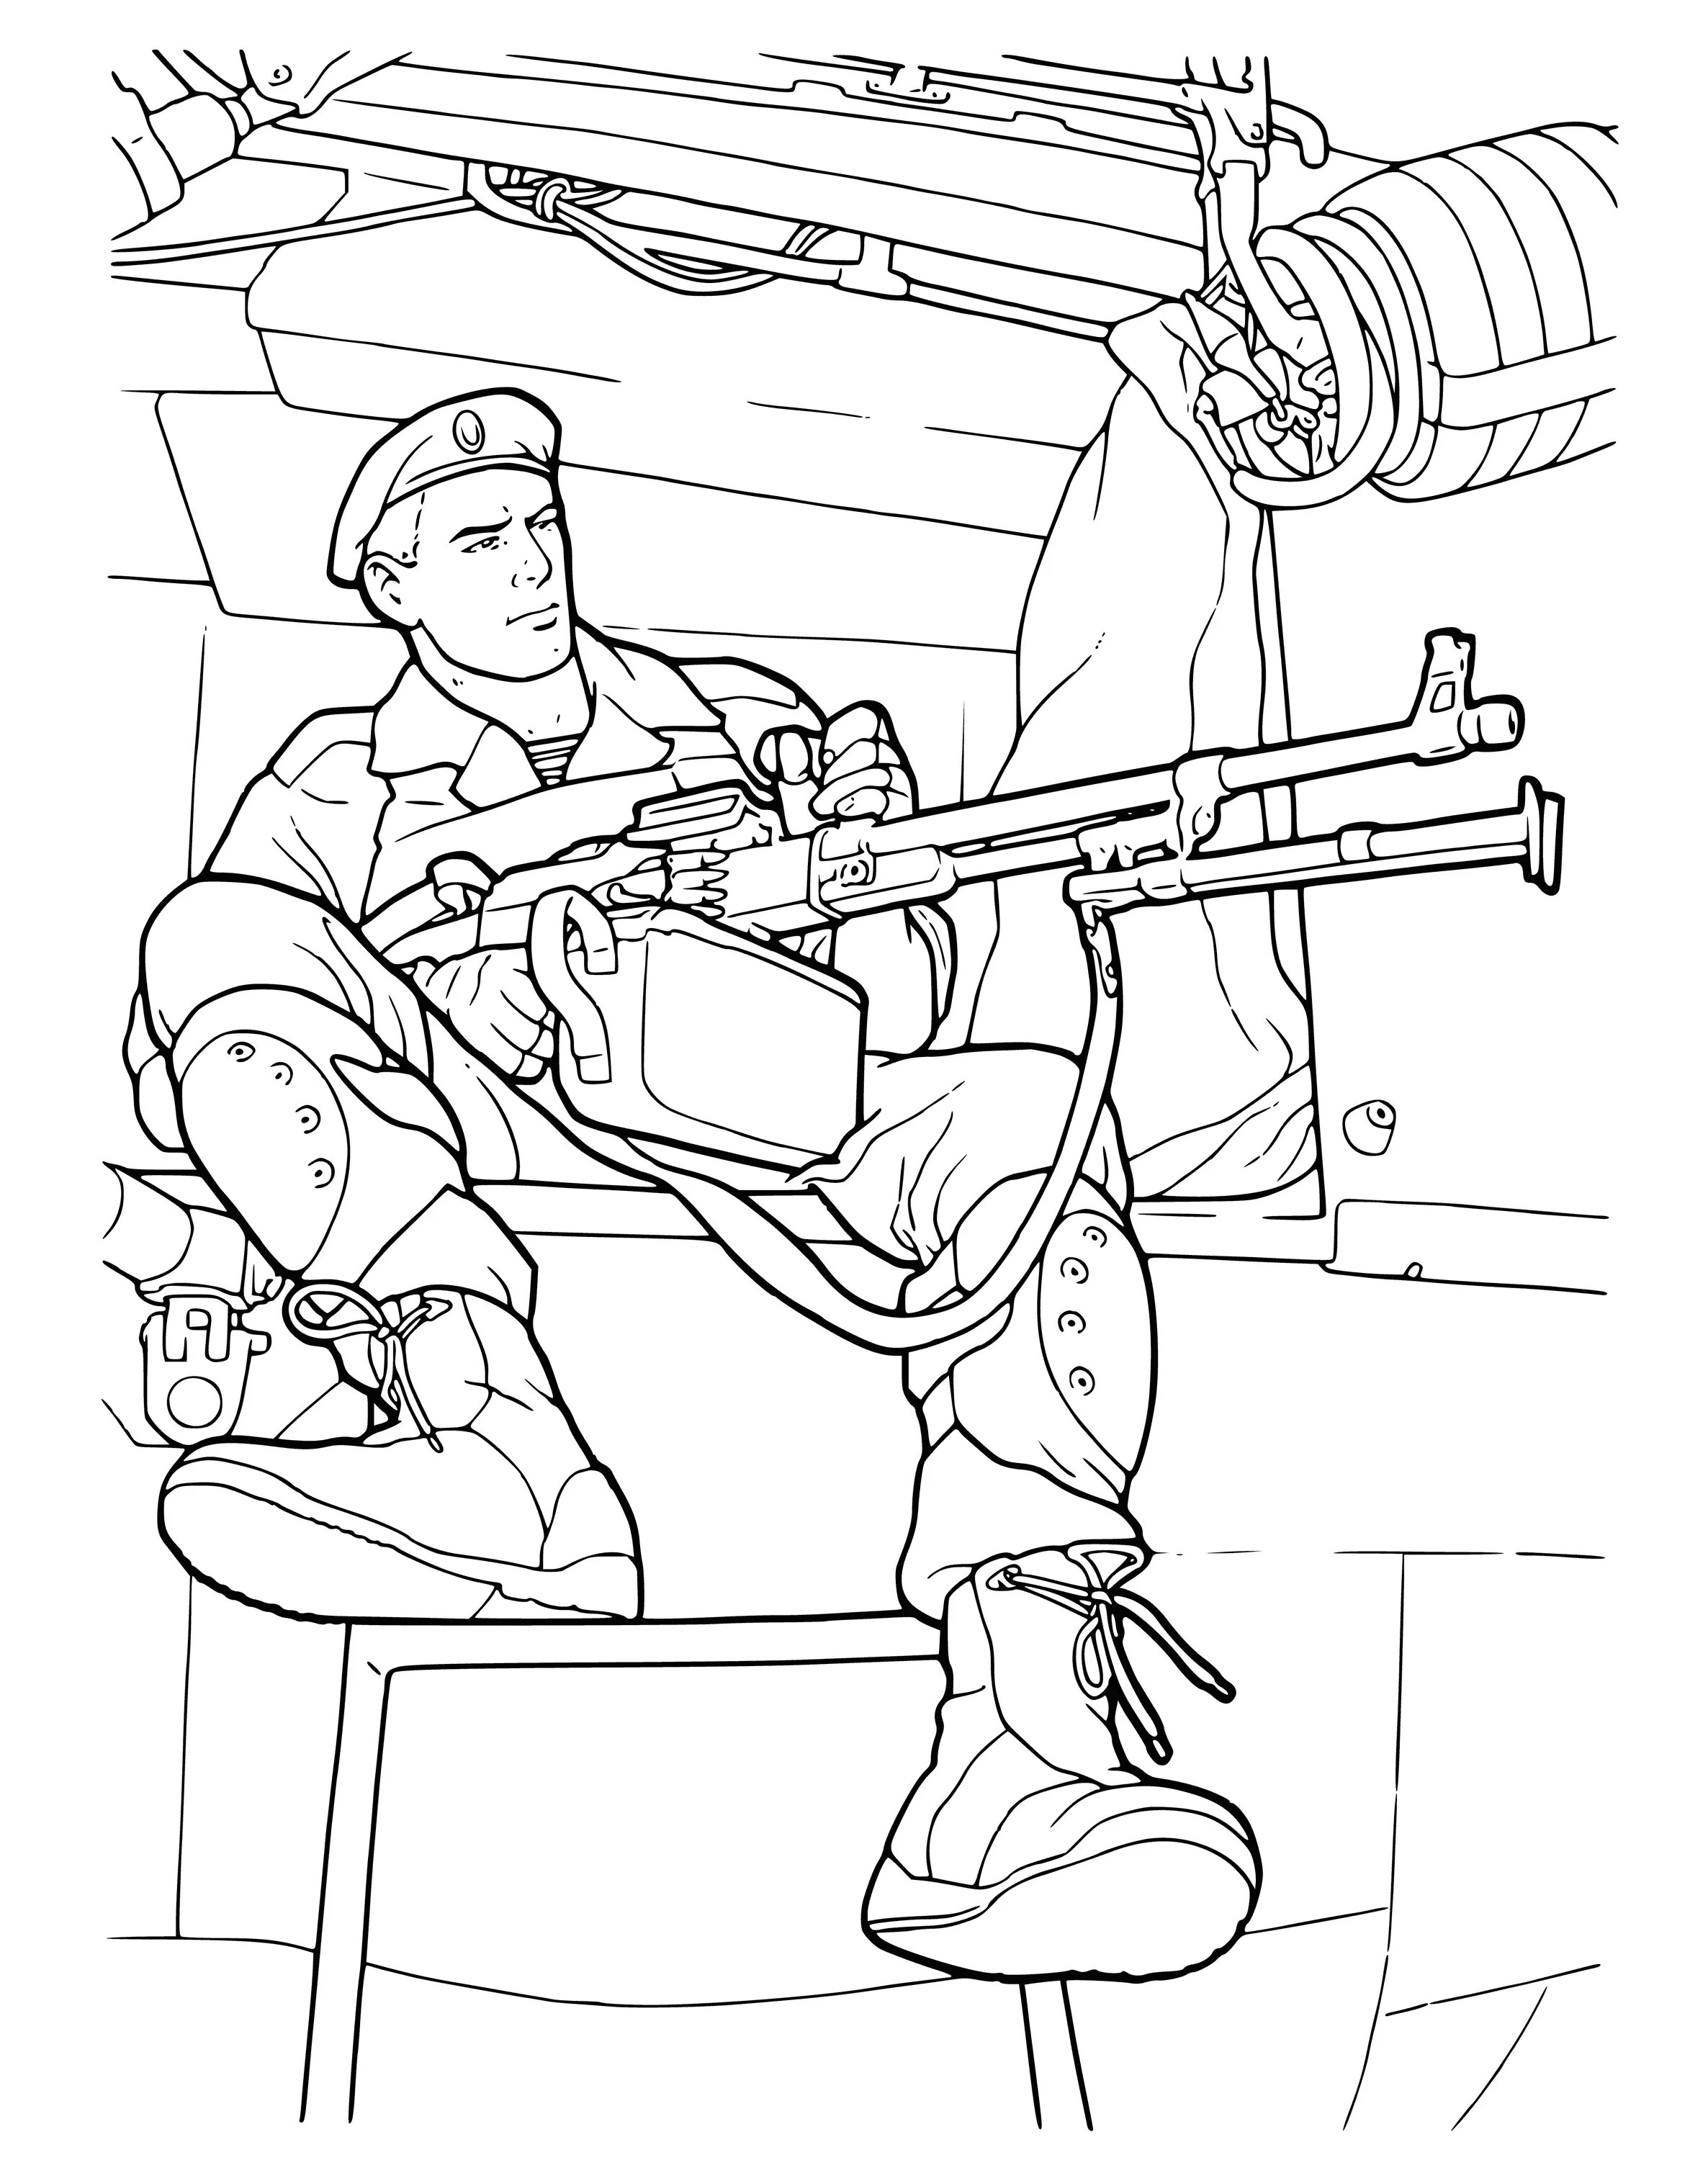 Fabulous military profession coloring for students